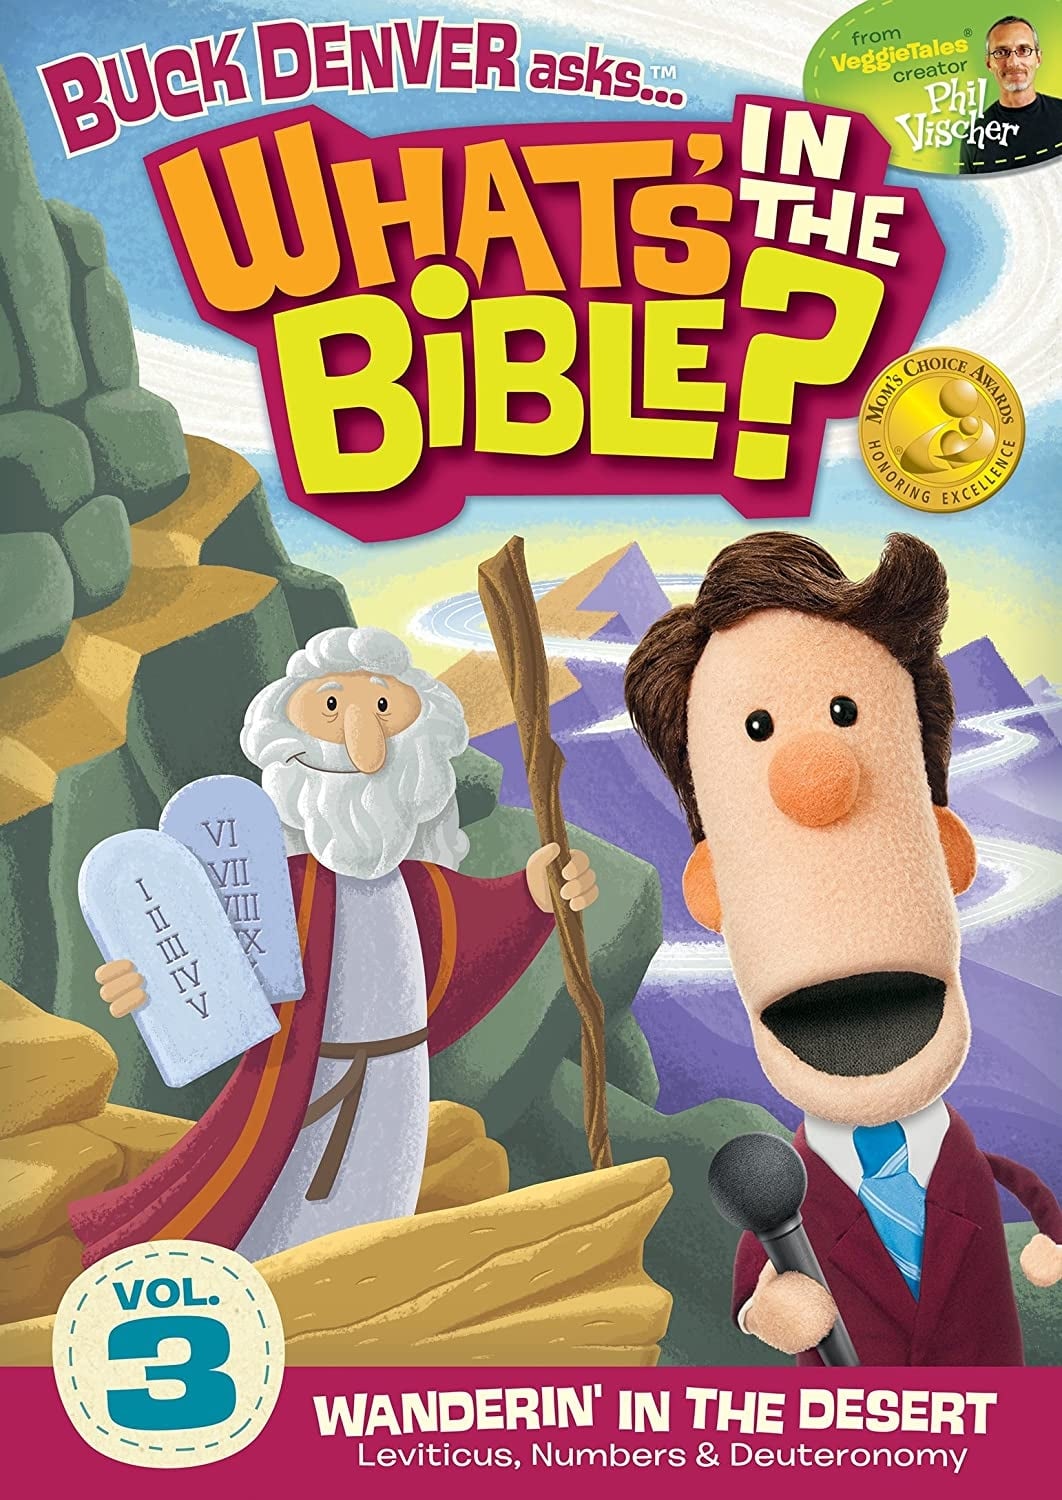 What's in the Bible? Volume 3: Wanderin in the Desert